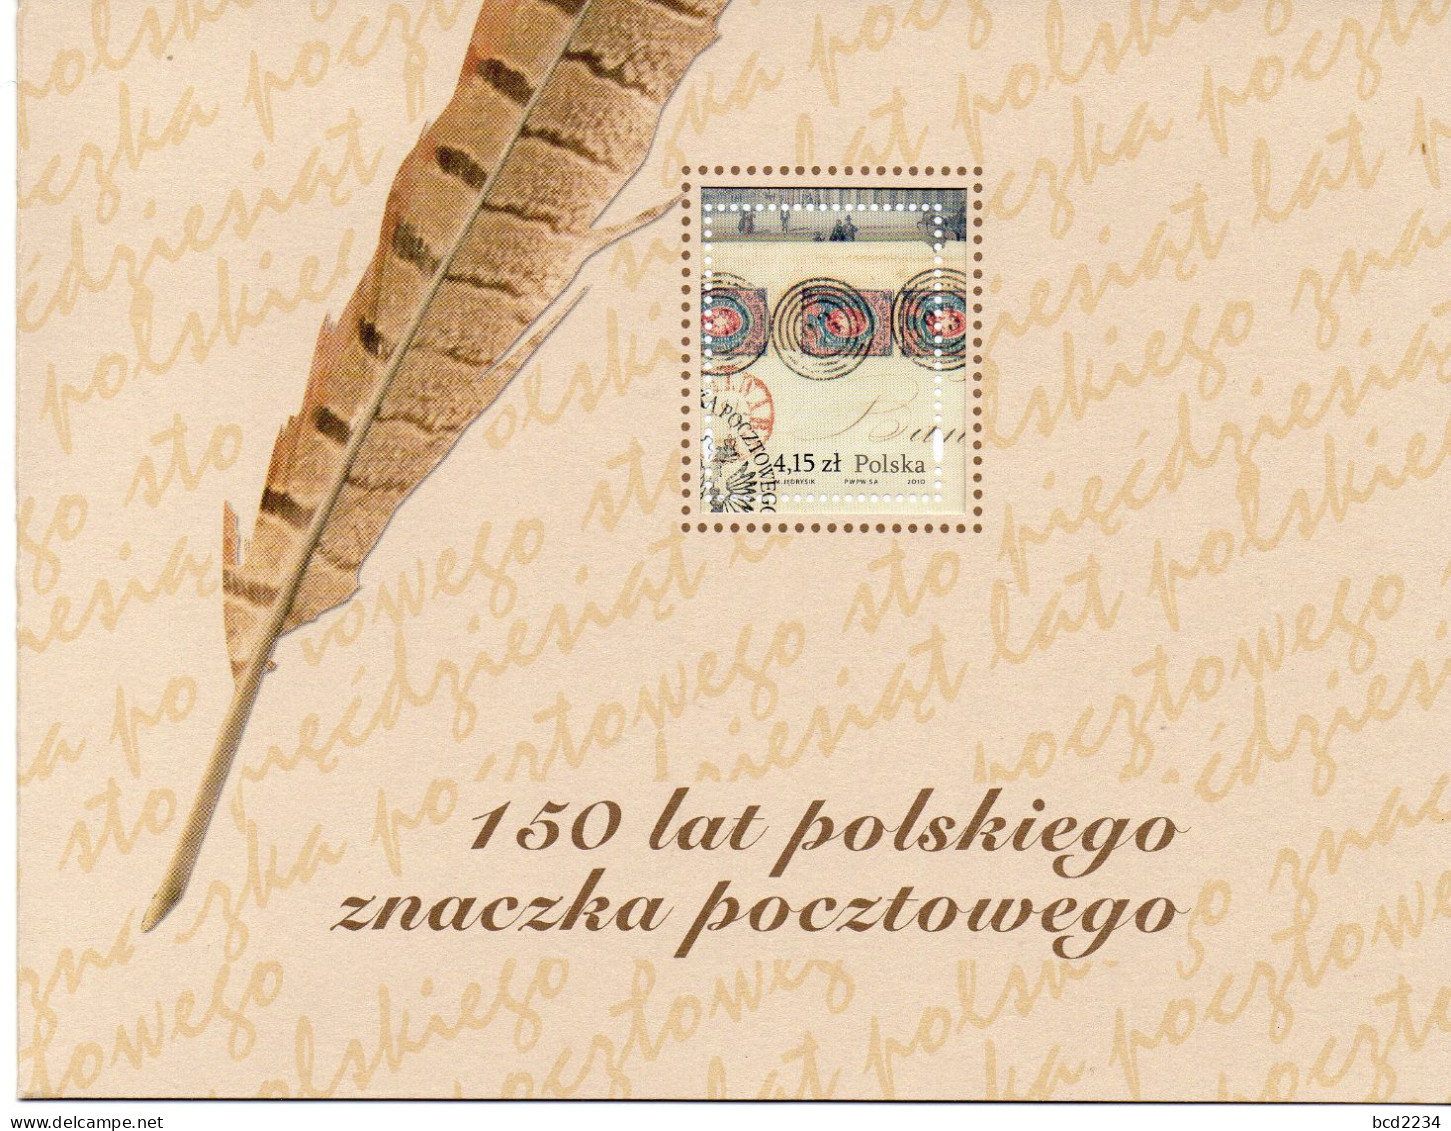 POLAND 2010 POLISH POST OFFICE LIMITED EDITION FOLDER: 150 YEARS ANNIVERSARY 1860 FIRST POLISH STAMP FDC & MS & ENVELOPE - Blocs & Feuillets